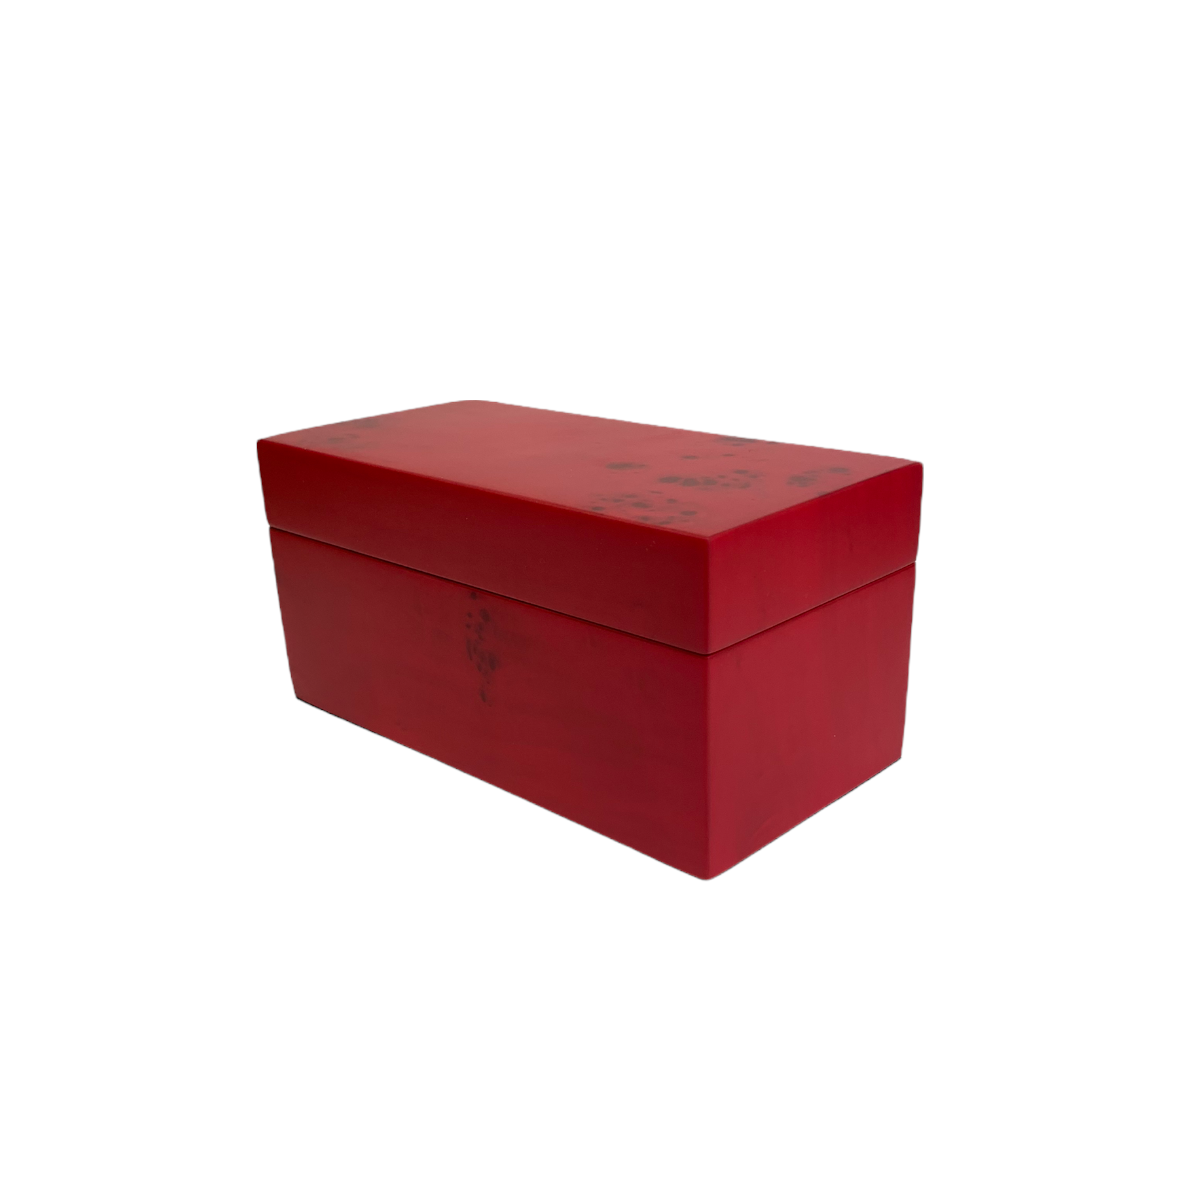 red wooden box